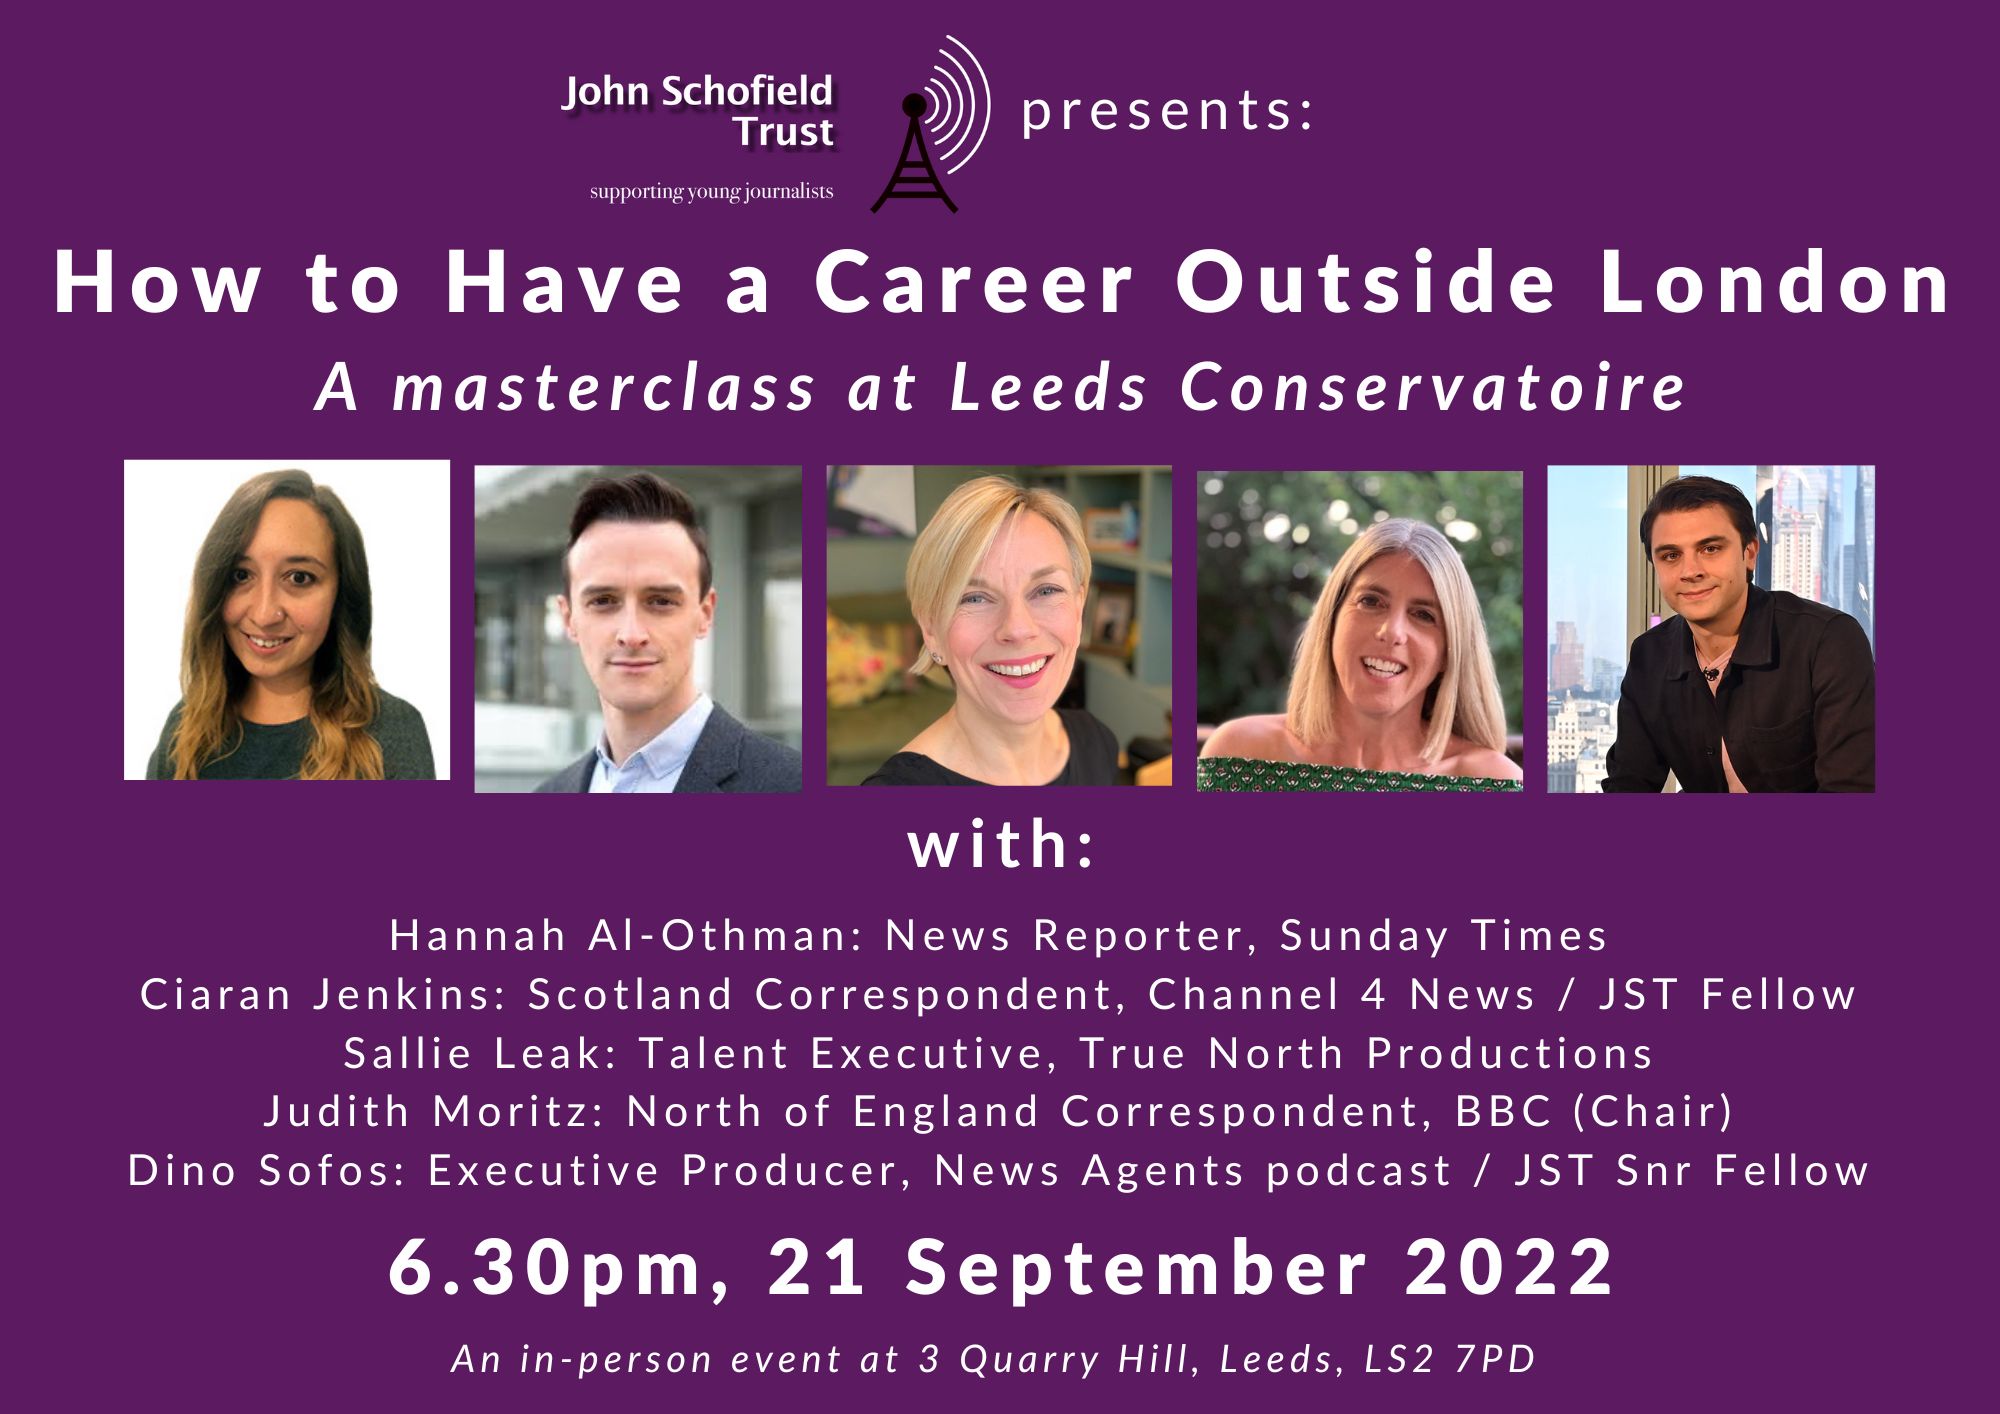 Live masterclass: How to have a career outside London!